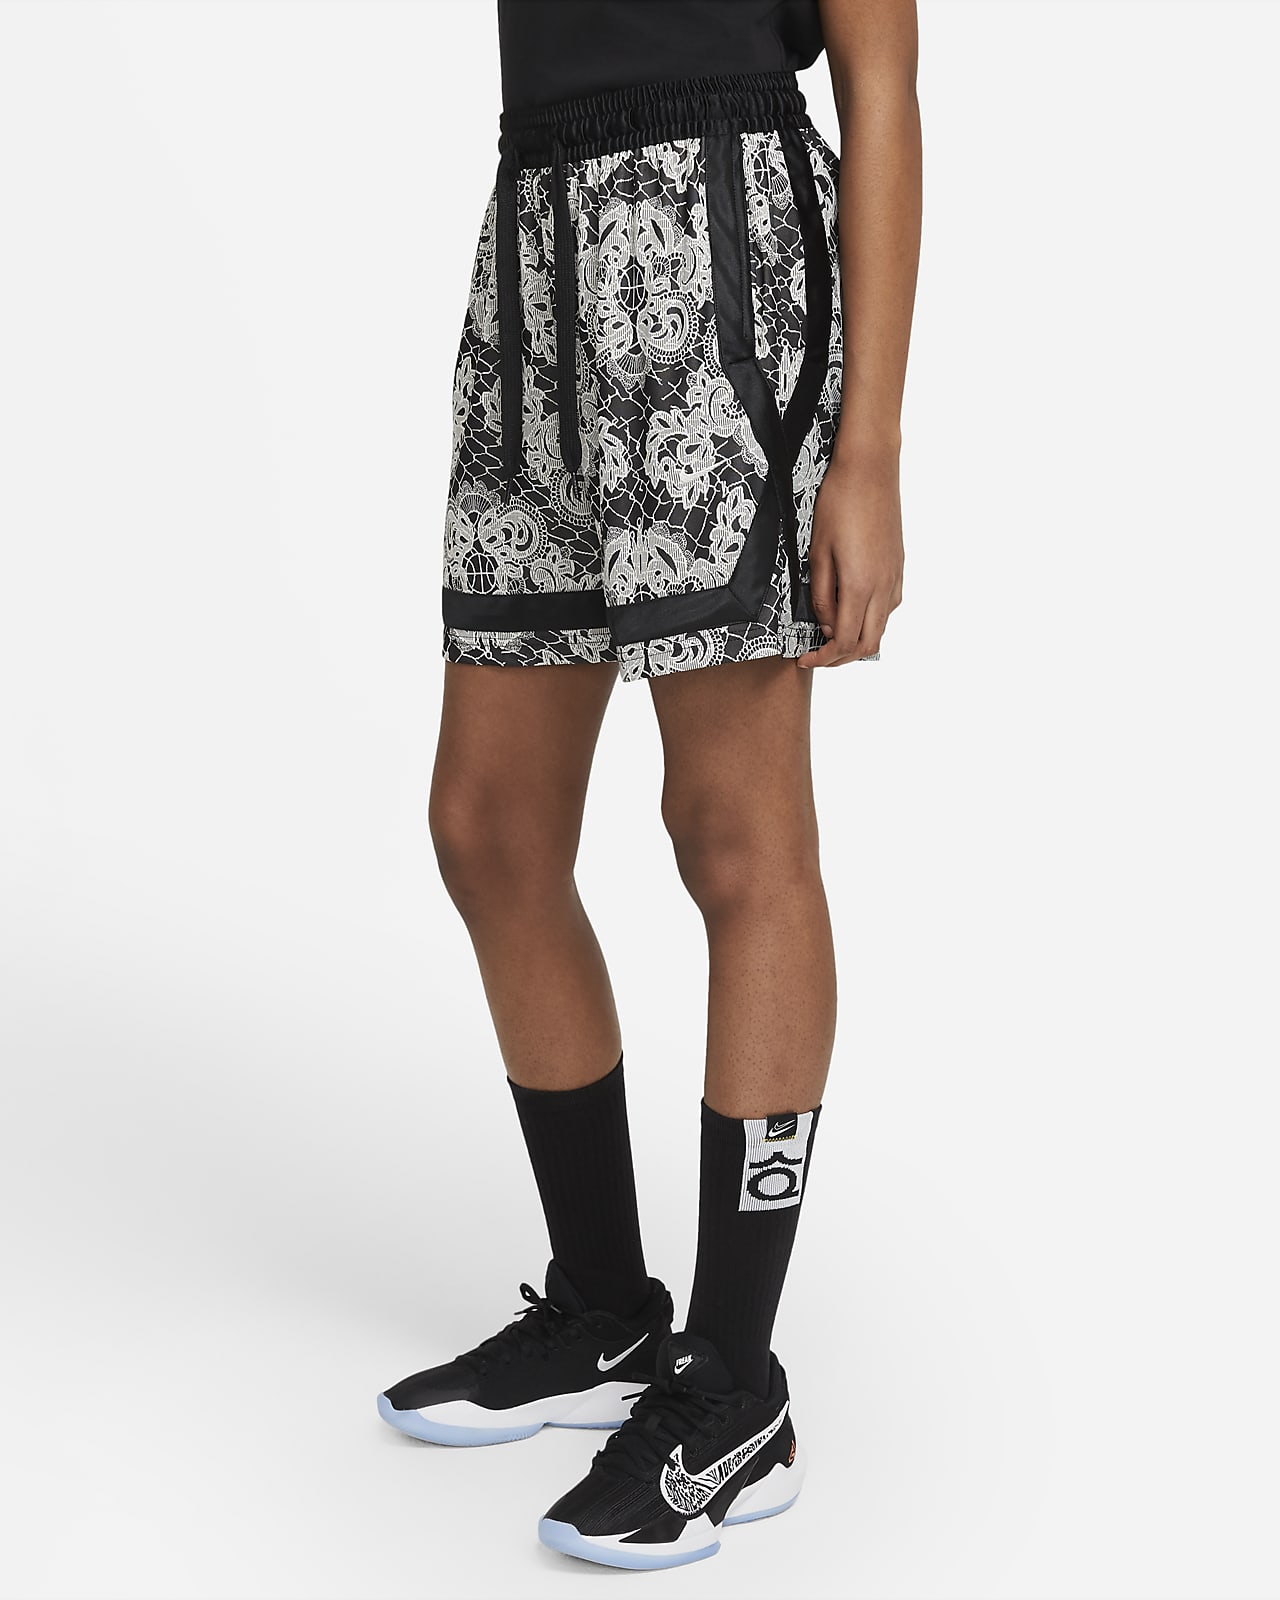 Nike Fly Crossover Women's Printed Basketball Shorts